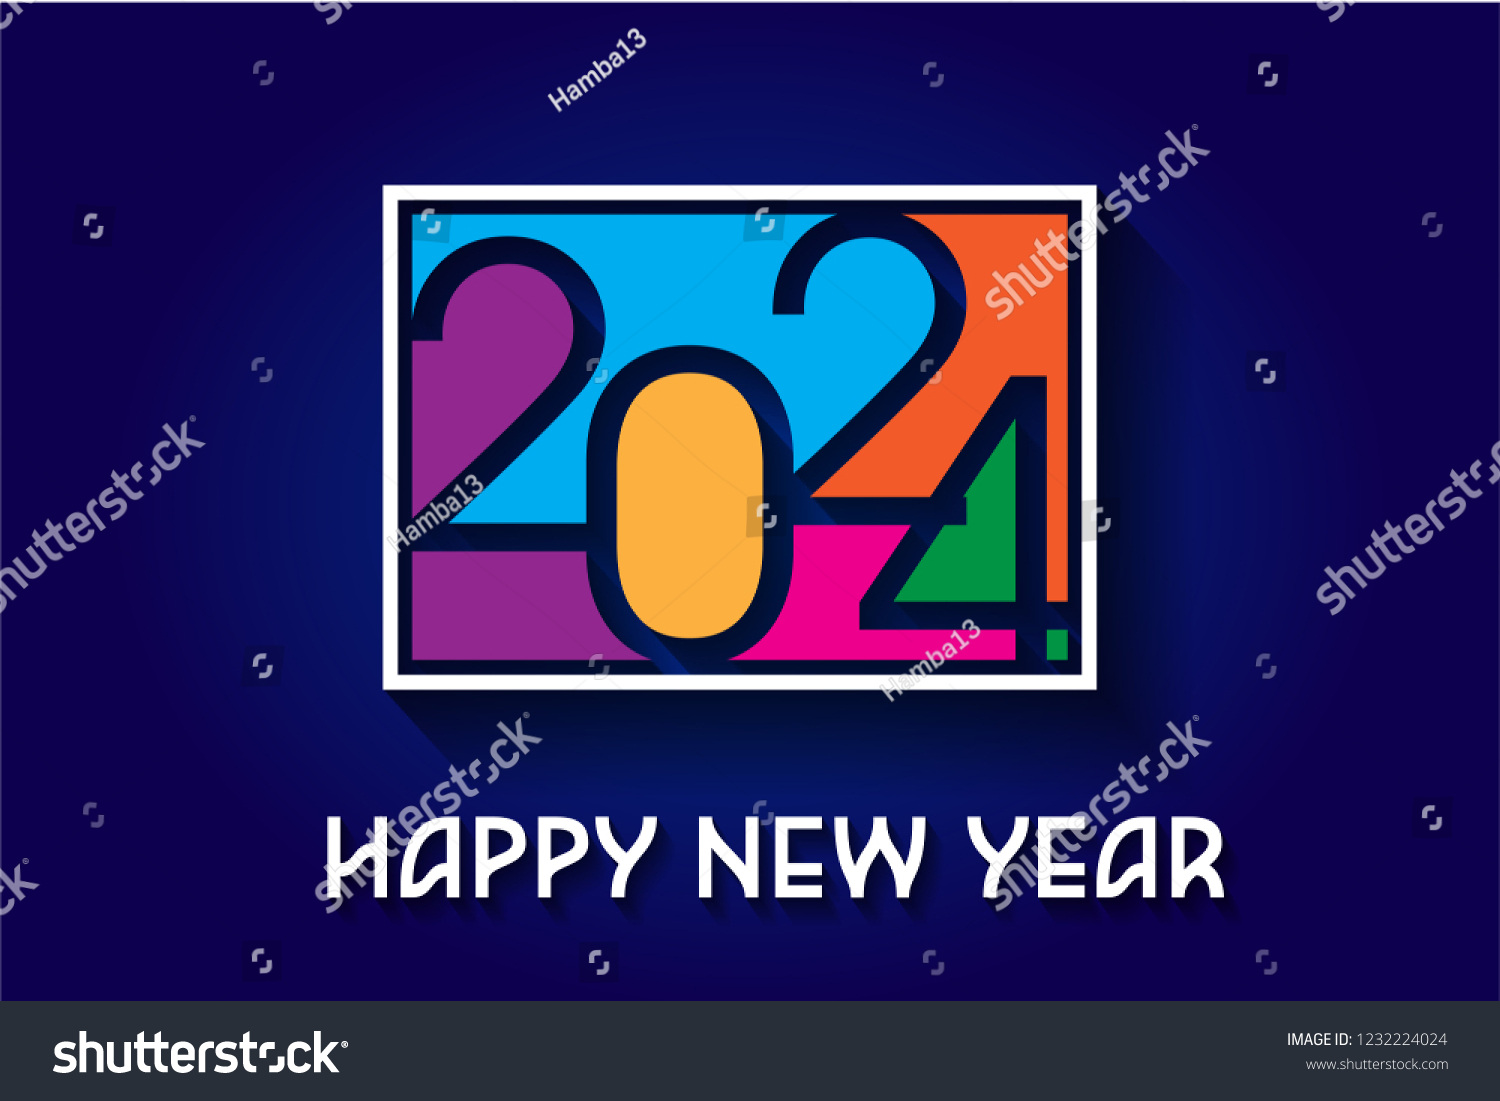 Happy New Year 2024 Design Royalty Free Stock Vector 1232224024